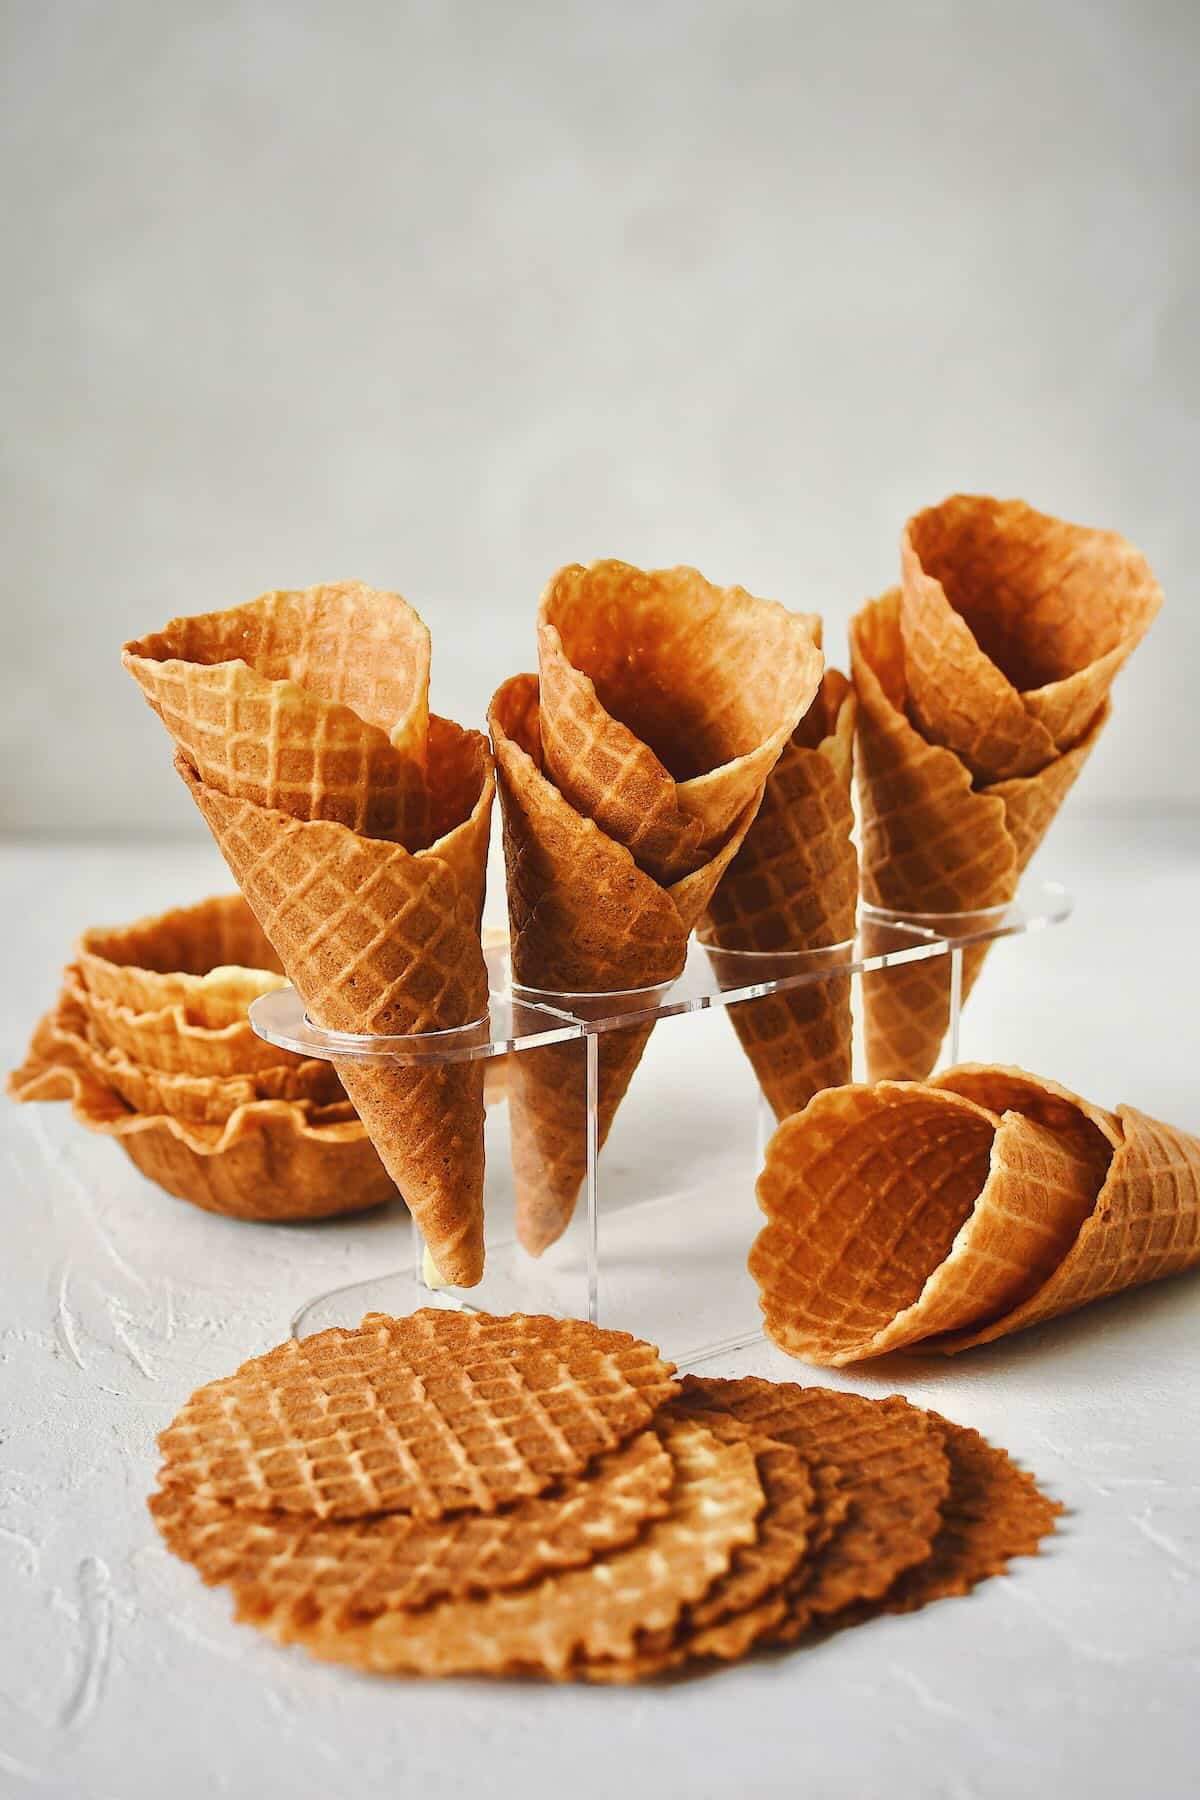 Finished Waffle Cone Recipe resting in a stand and ready to be filled with ice cream. Along with waffle bowls and flat waffle chips around it.